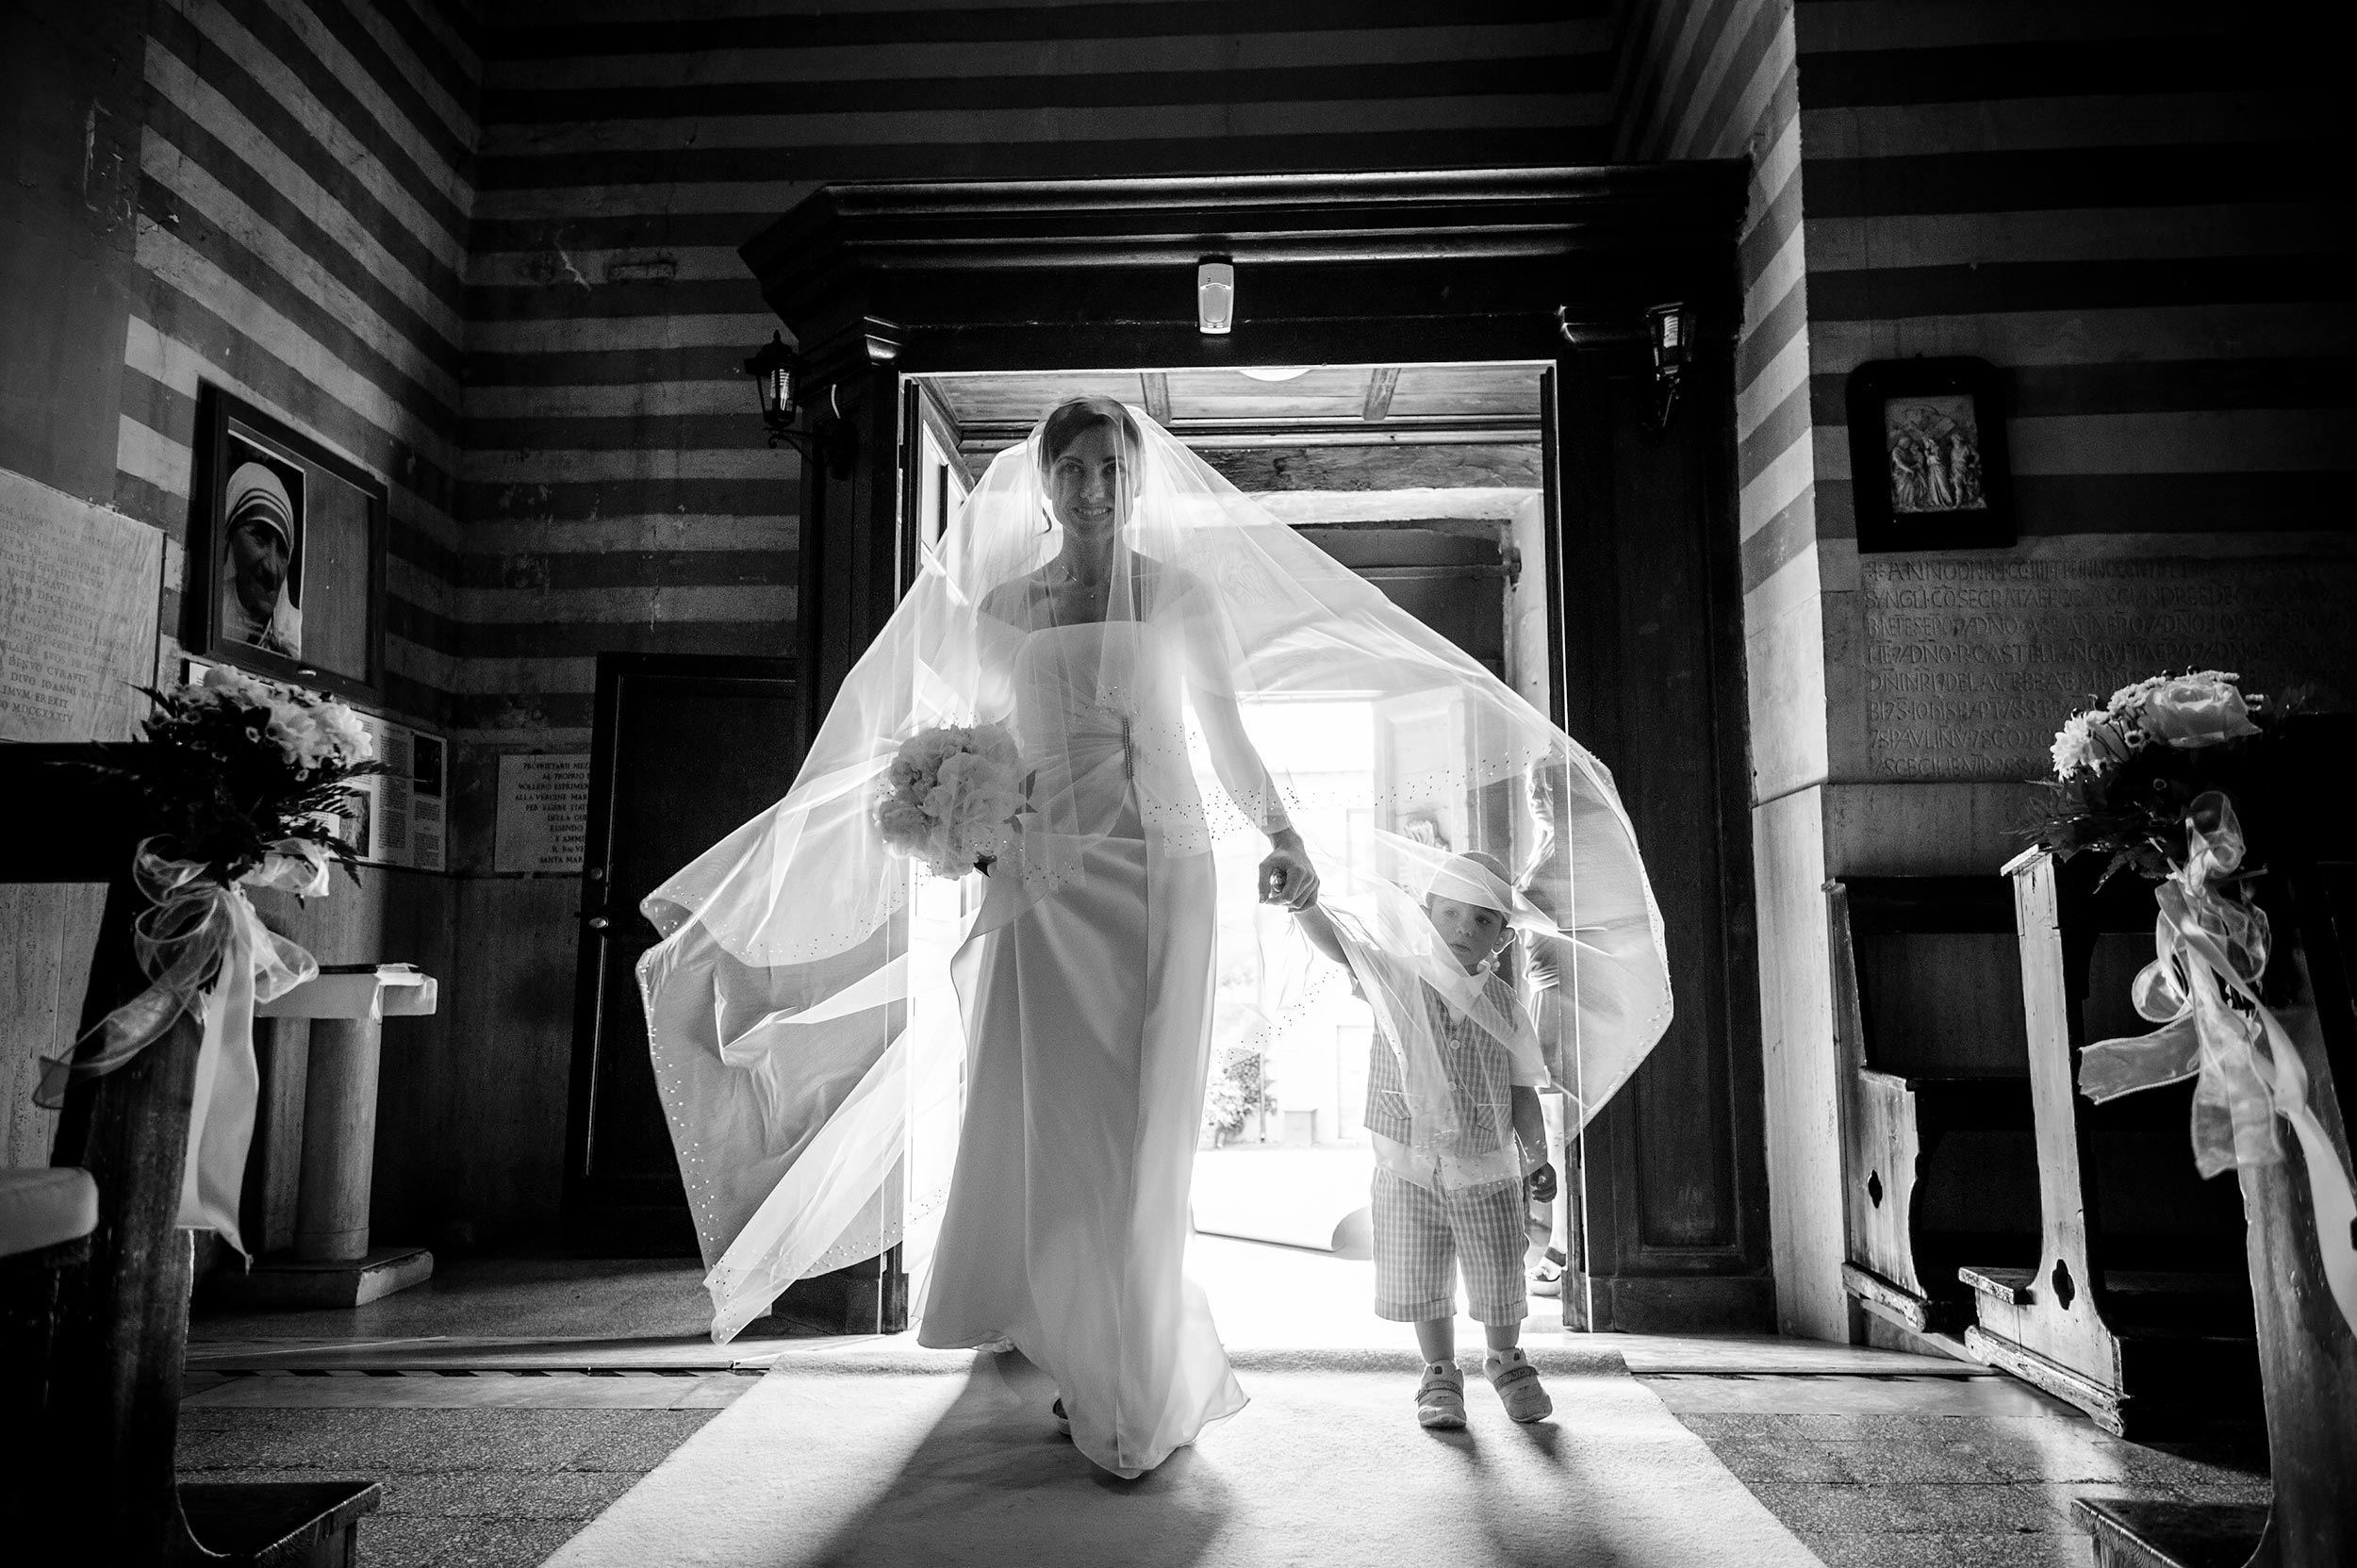 thr-bride-enters-the-church-holding-her-son-by-the-hand-big-bridal-veil-in-italy-black-and-white-wedding-photography.jpg